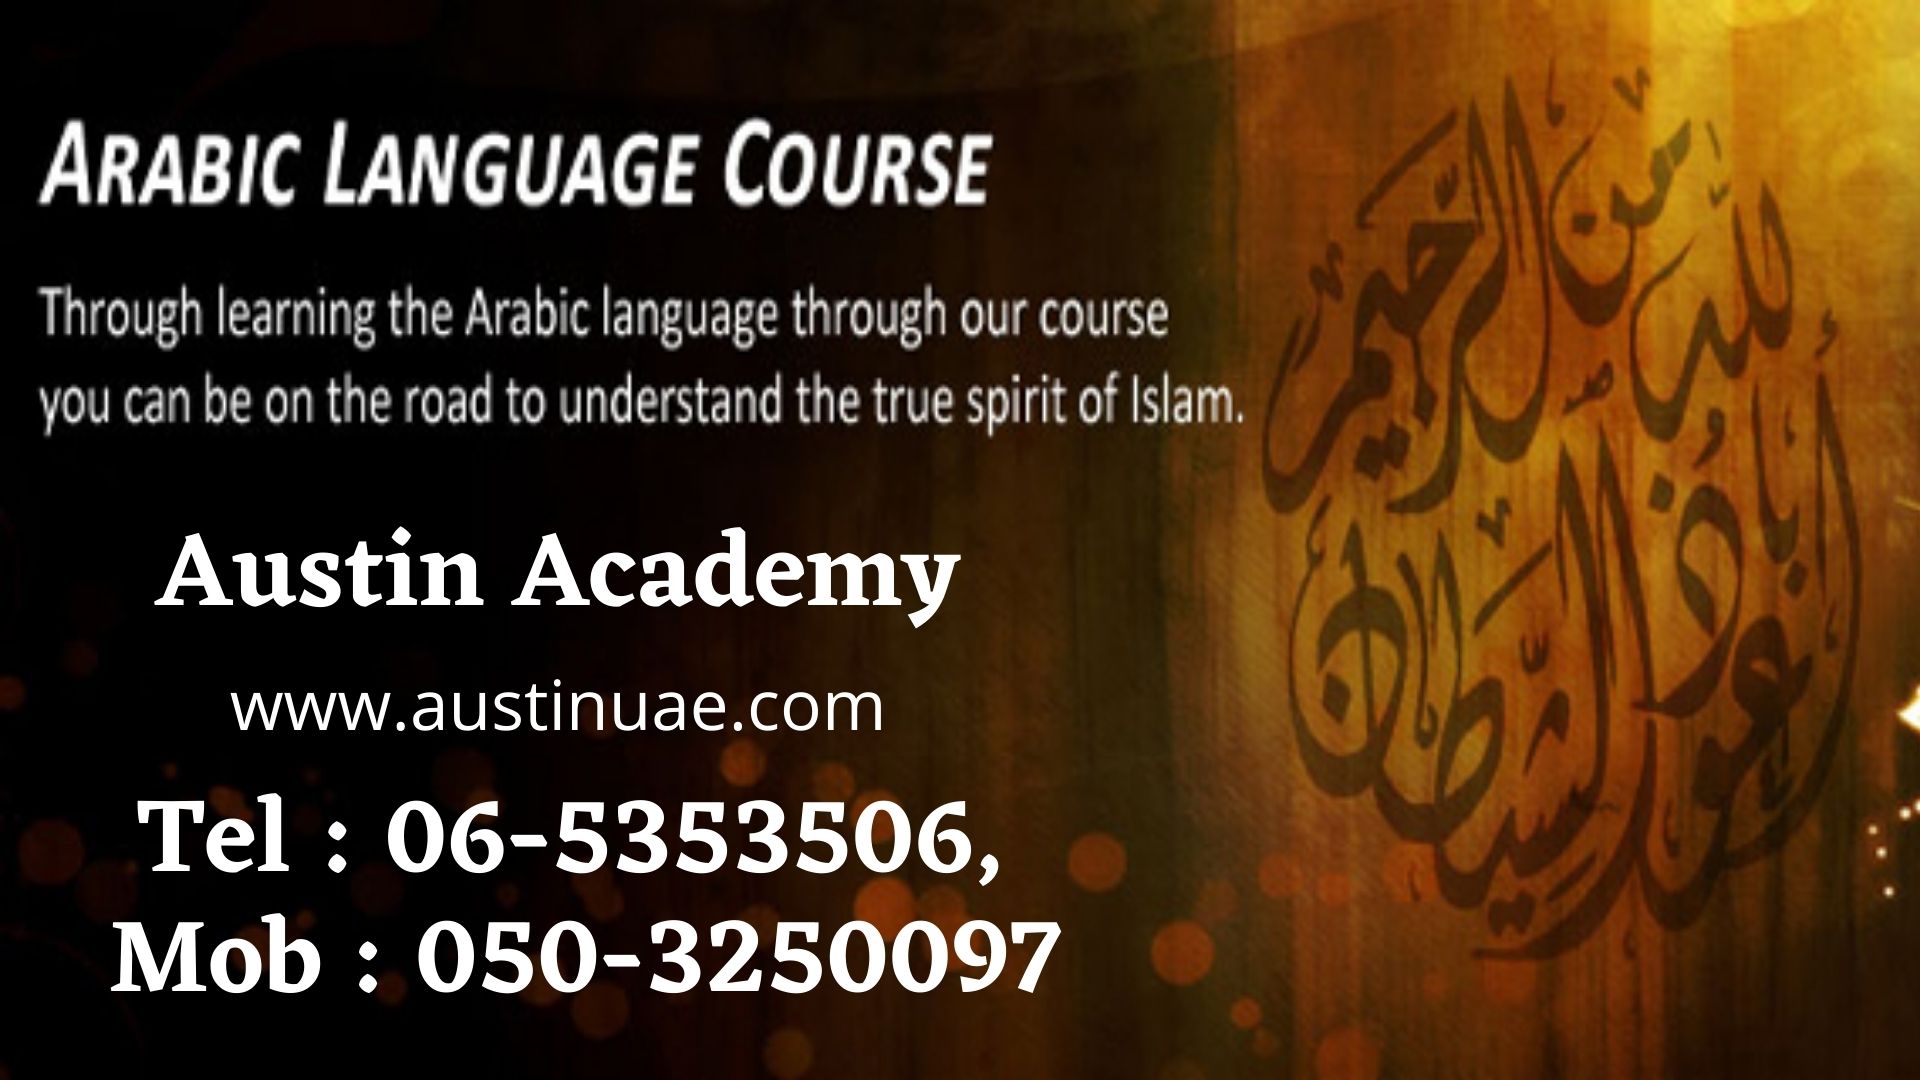 Spoken Arabic Classes In Sharjah With Best Offer Call 058 8197415